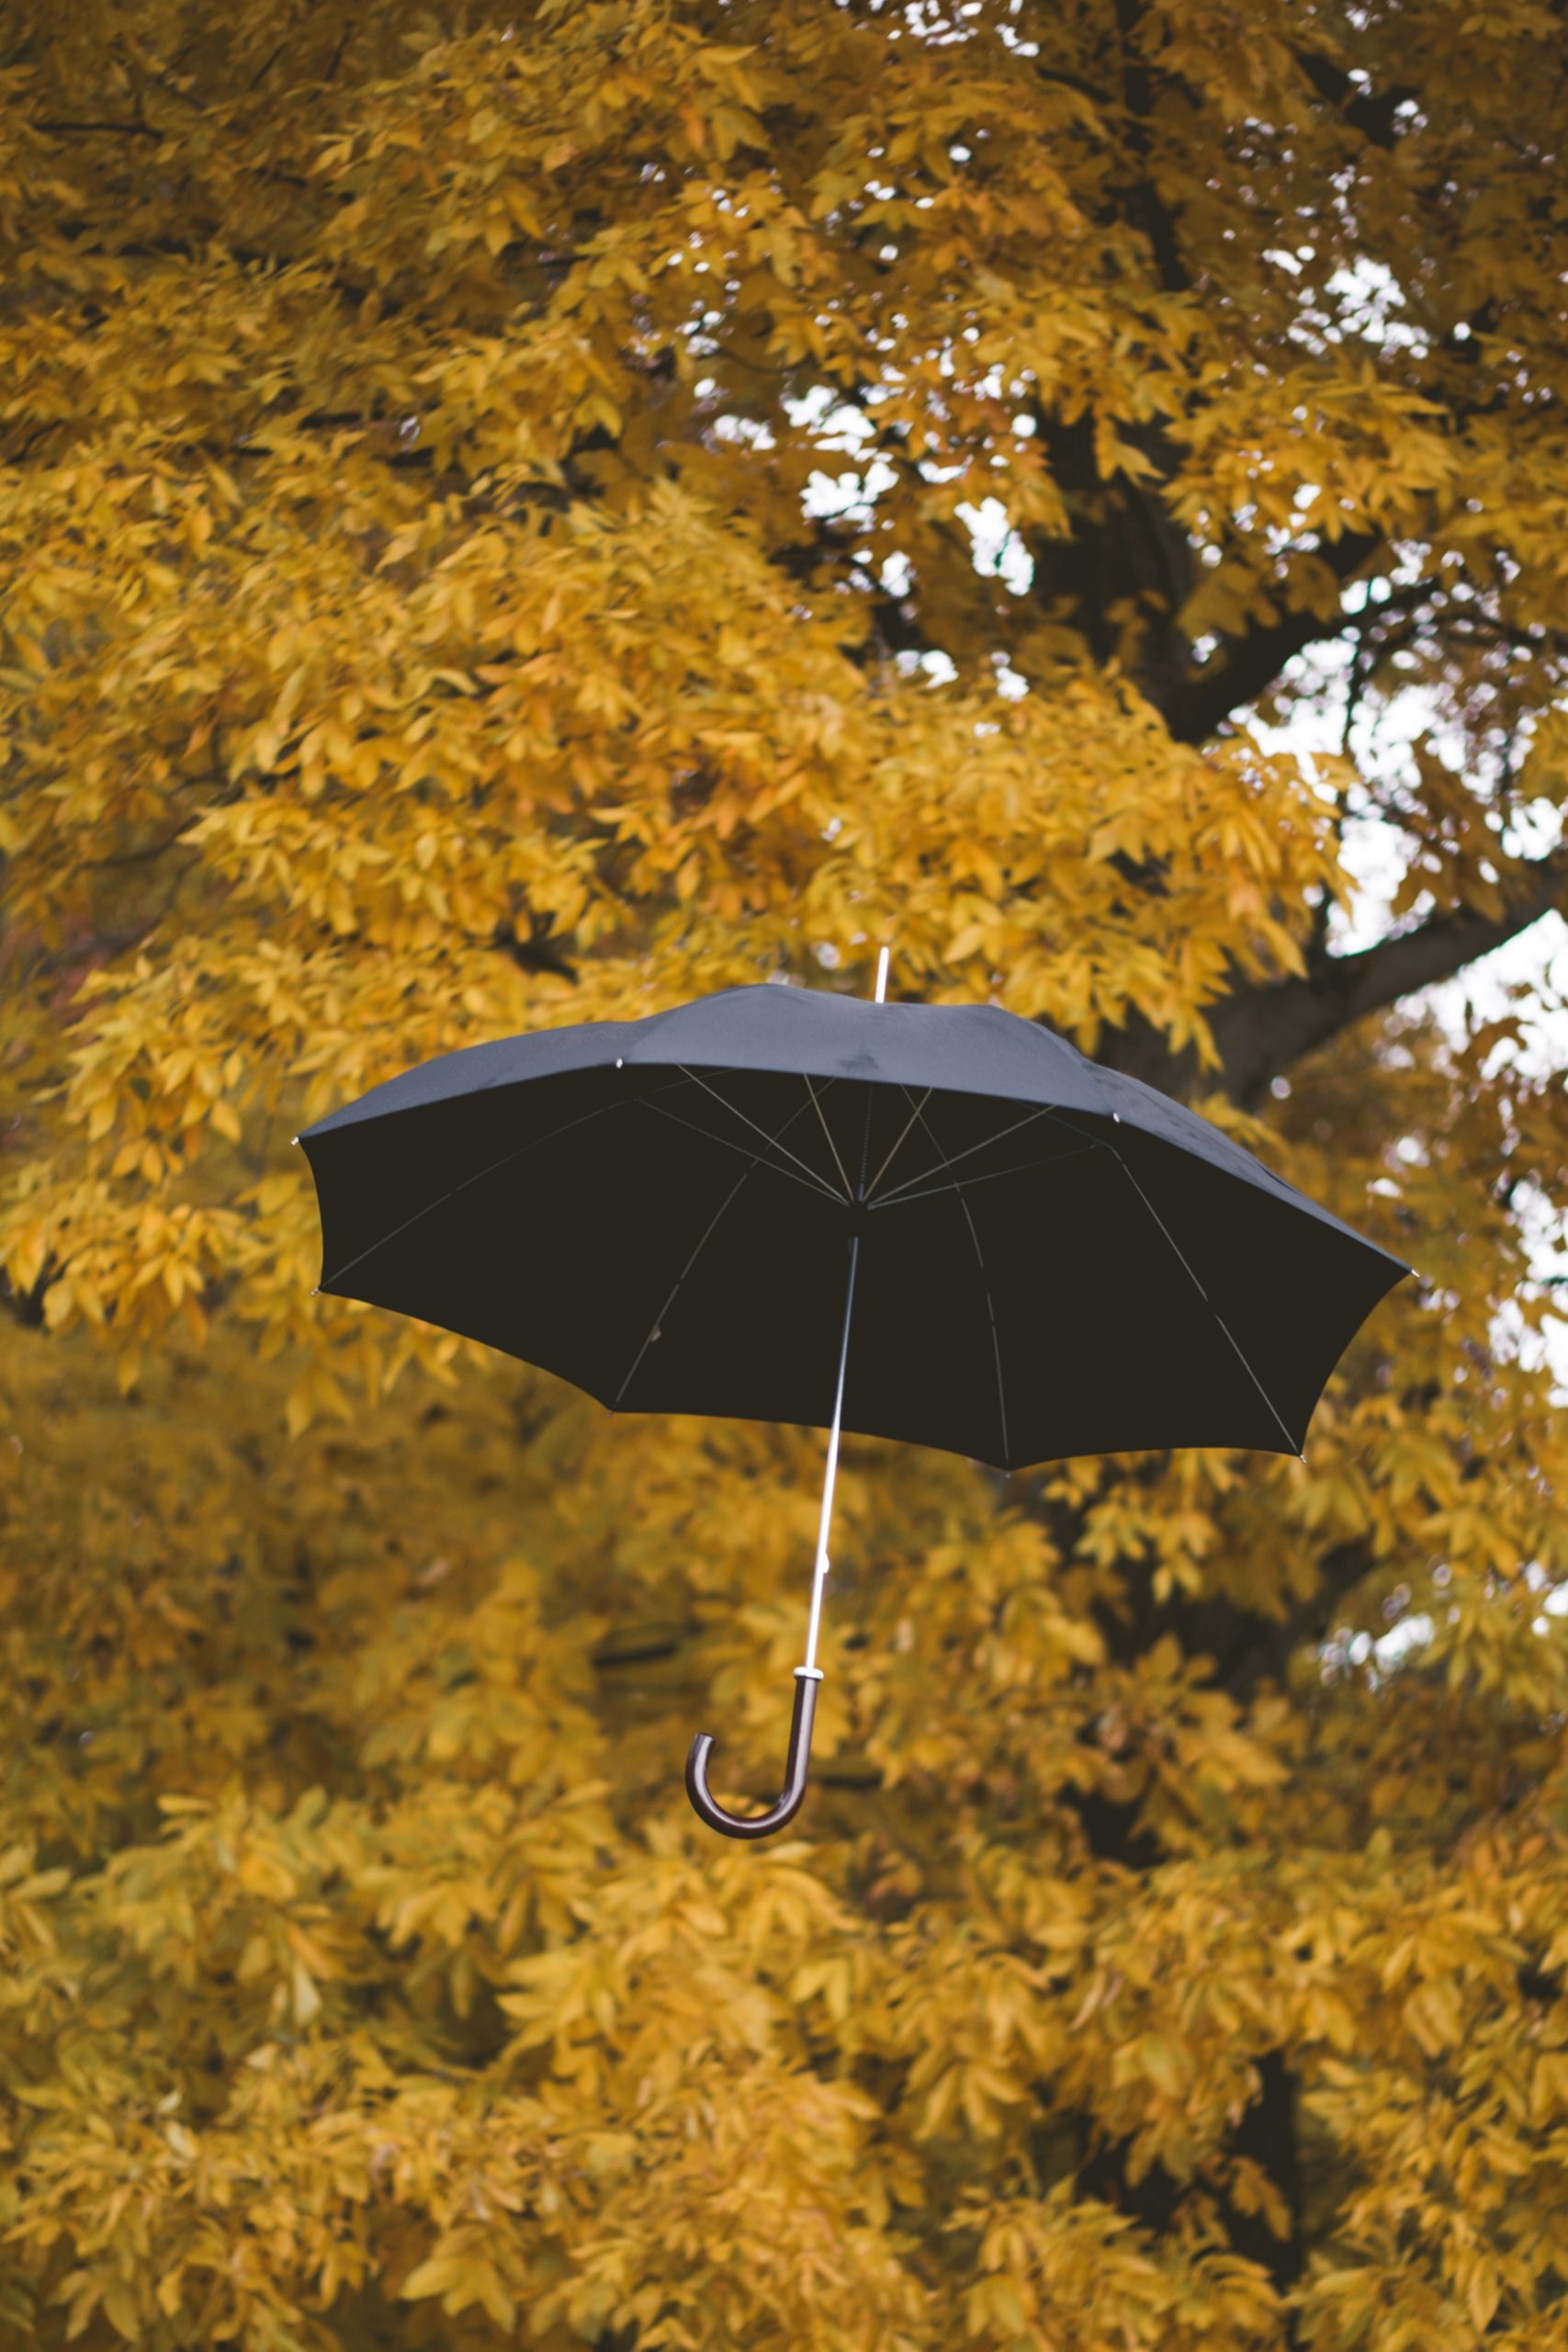 A black umbrella hovers in front of a tree, covered in yellow leaves.